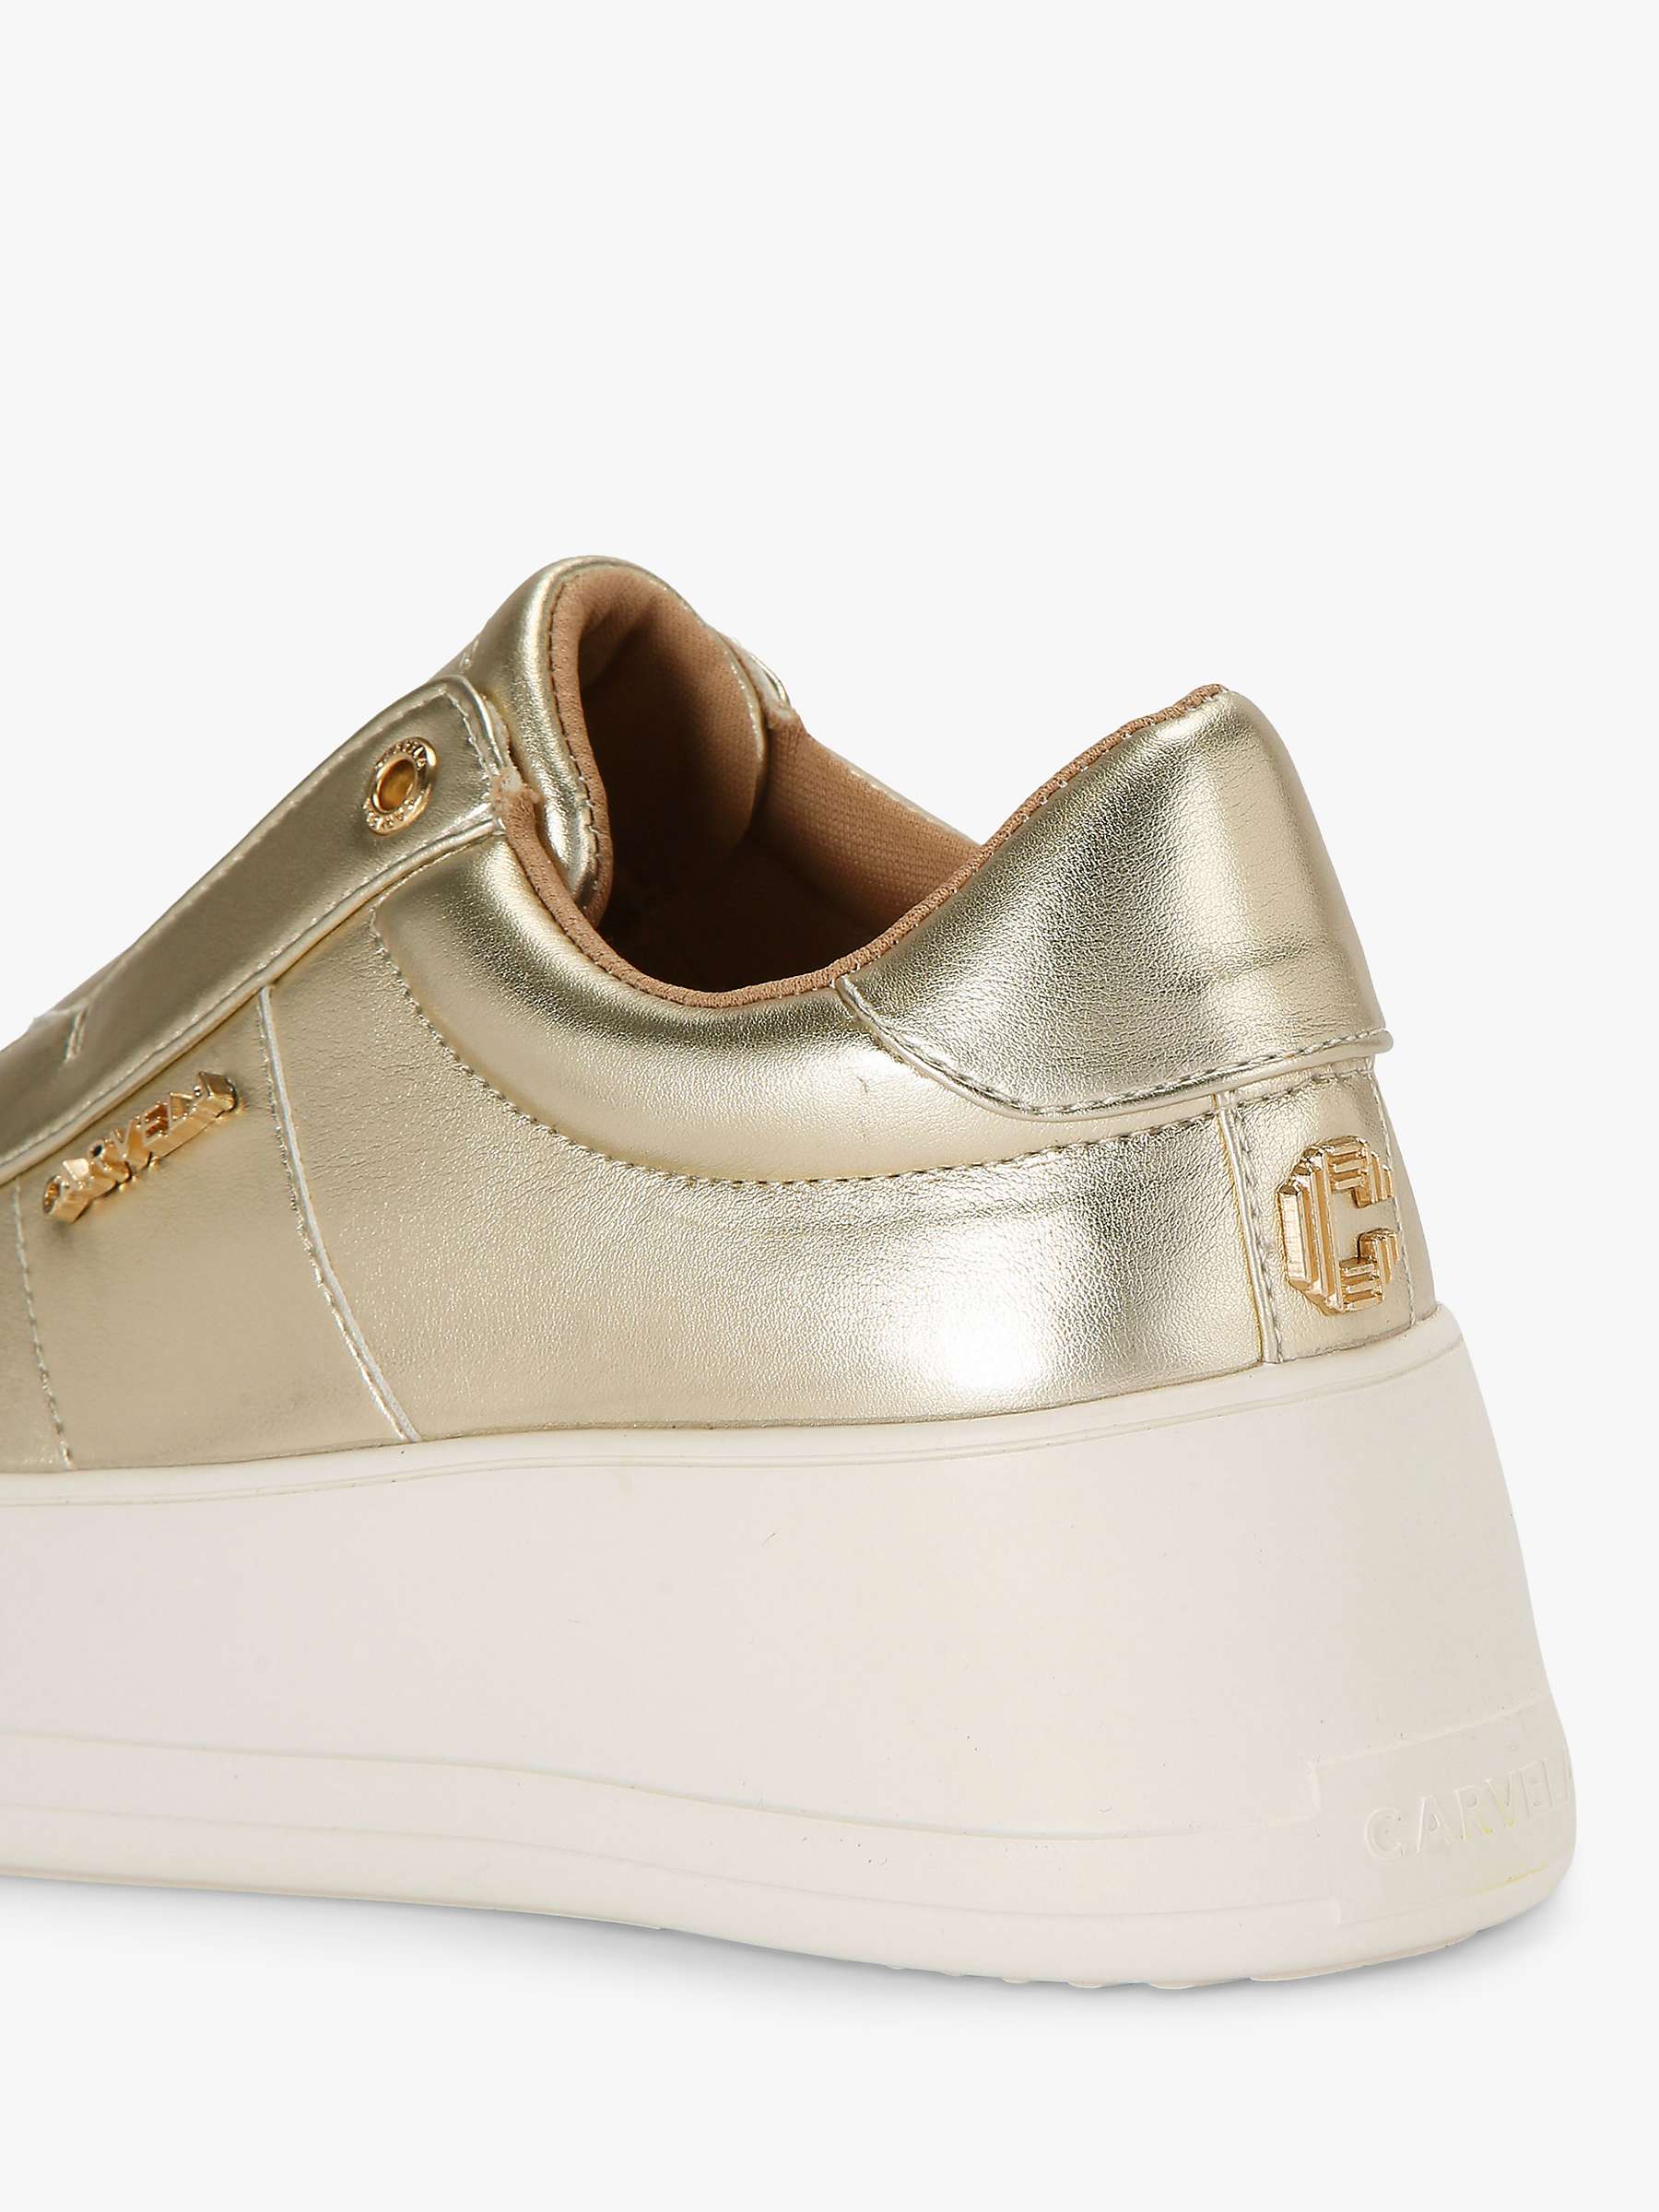 Buy Carvela Jive 2 Laceless Trainers, Gold Online at johnlewis.com